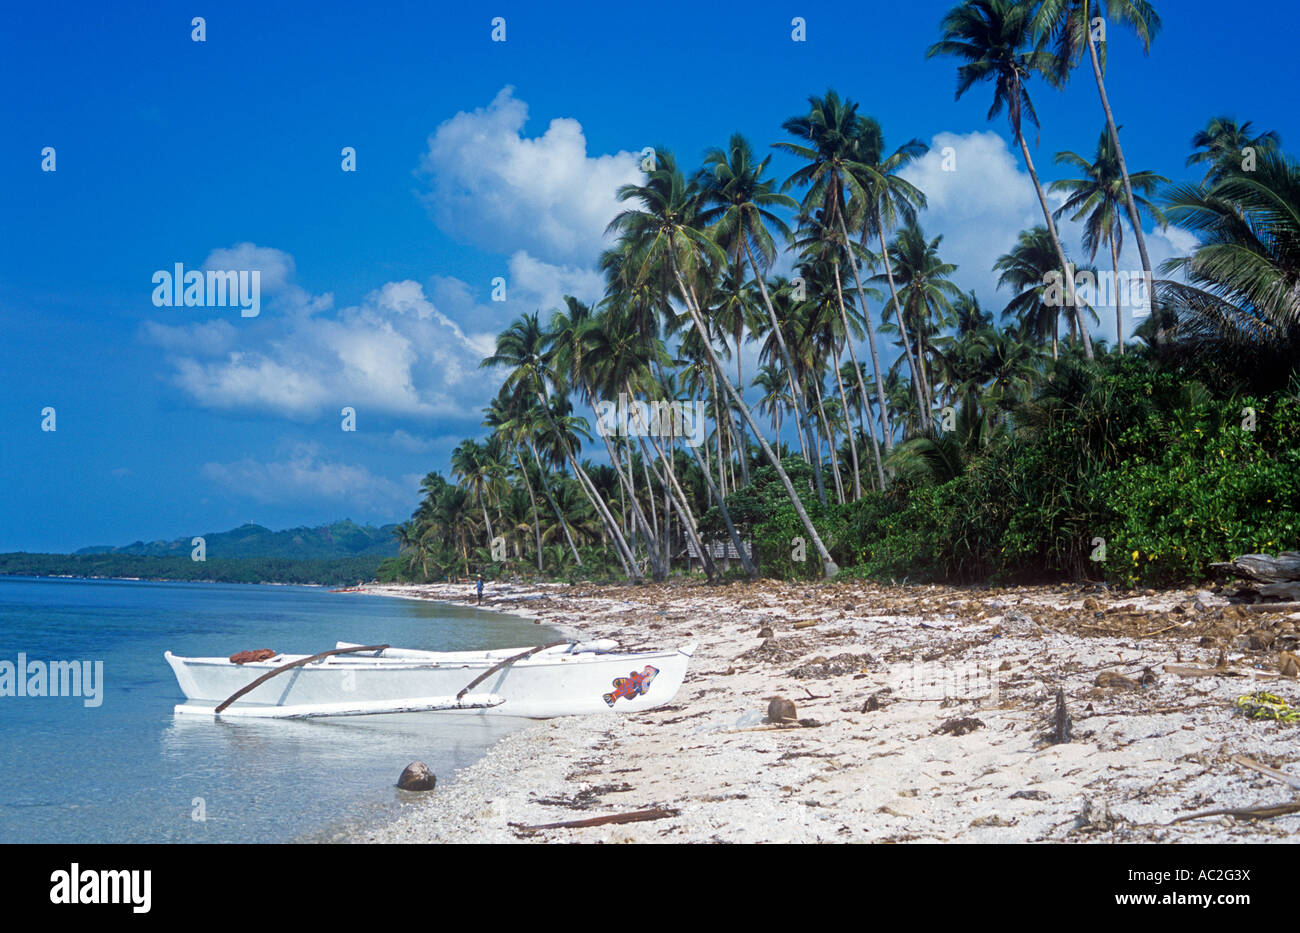 Ampo beach and boat, Tangka'an, Southern Leyte. Stock Photo